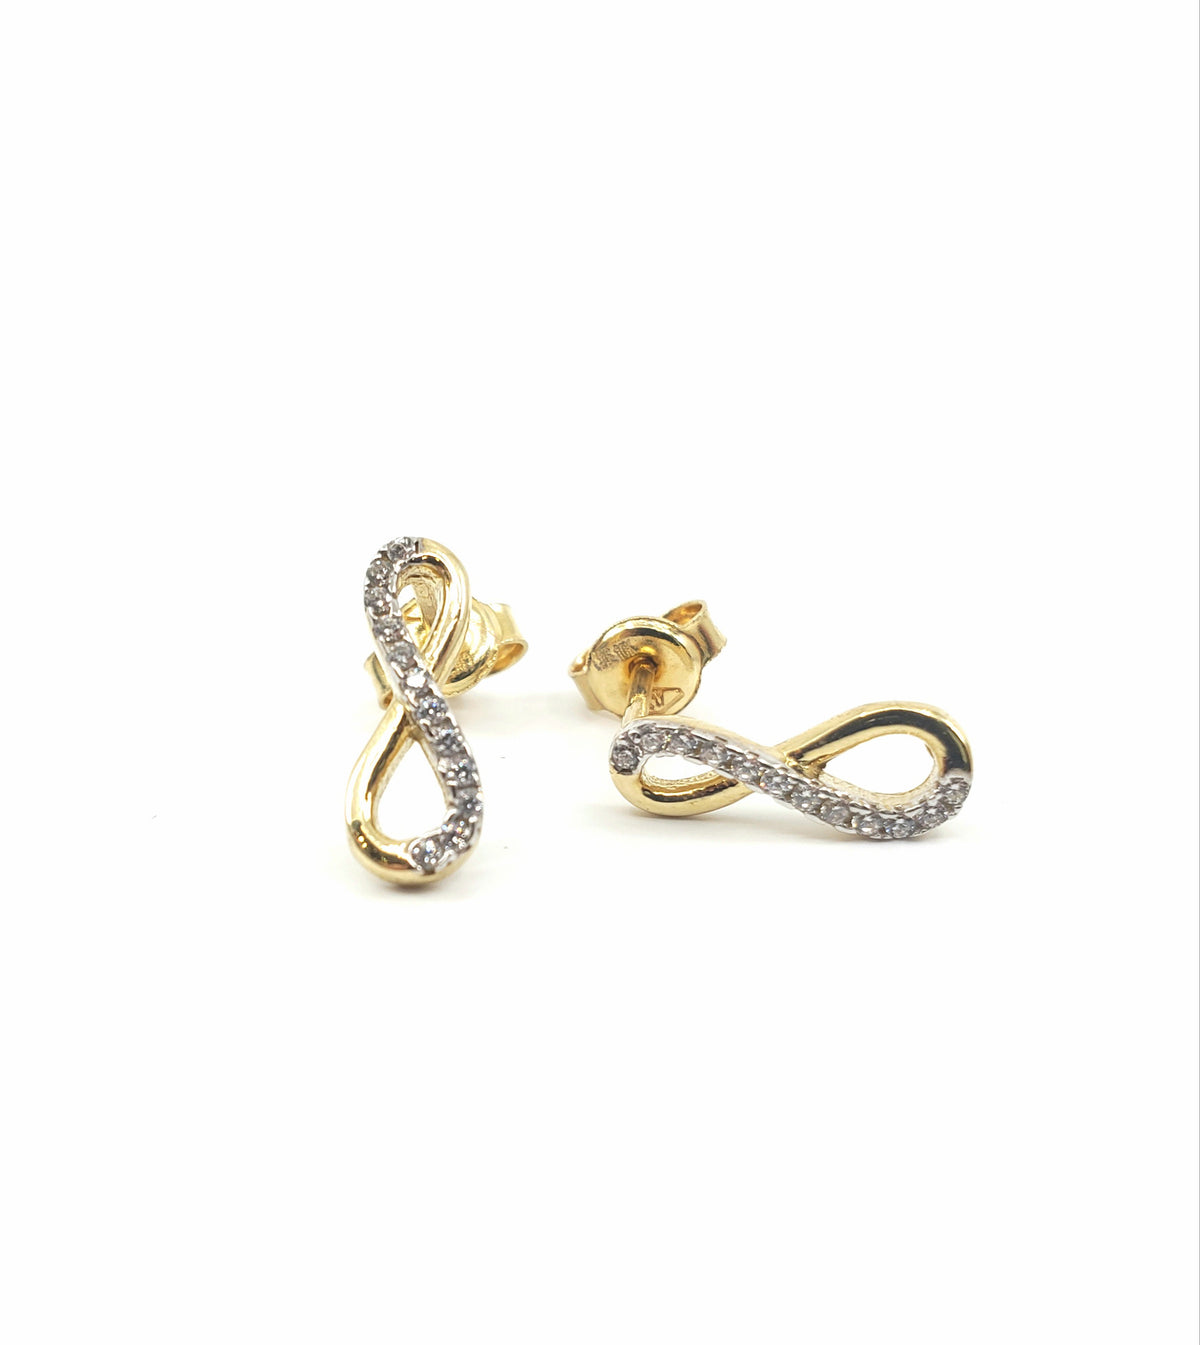 10K Yellow Gold Infinity Design with Cubic Zirconia Stud Earrings - 12mm x 5mm